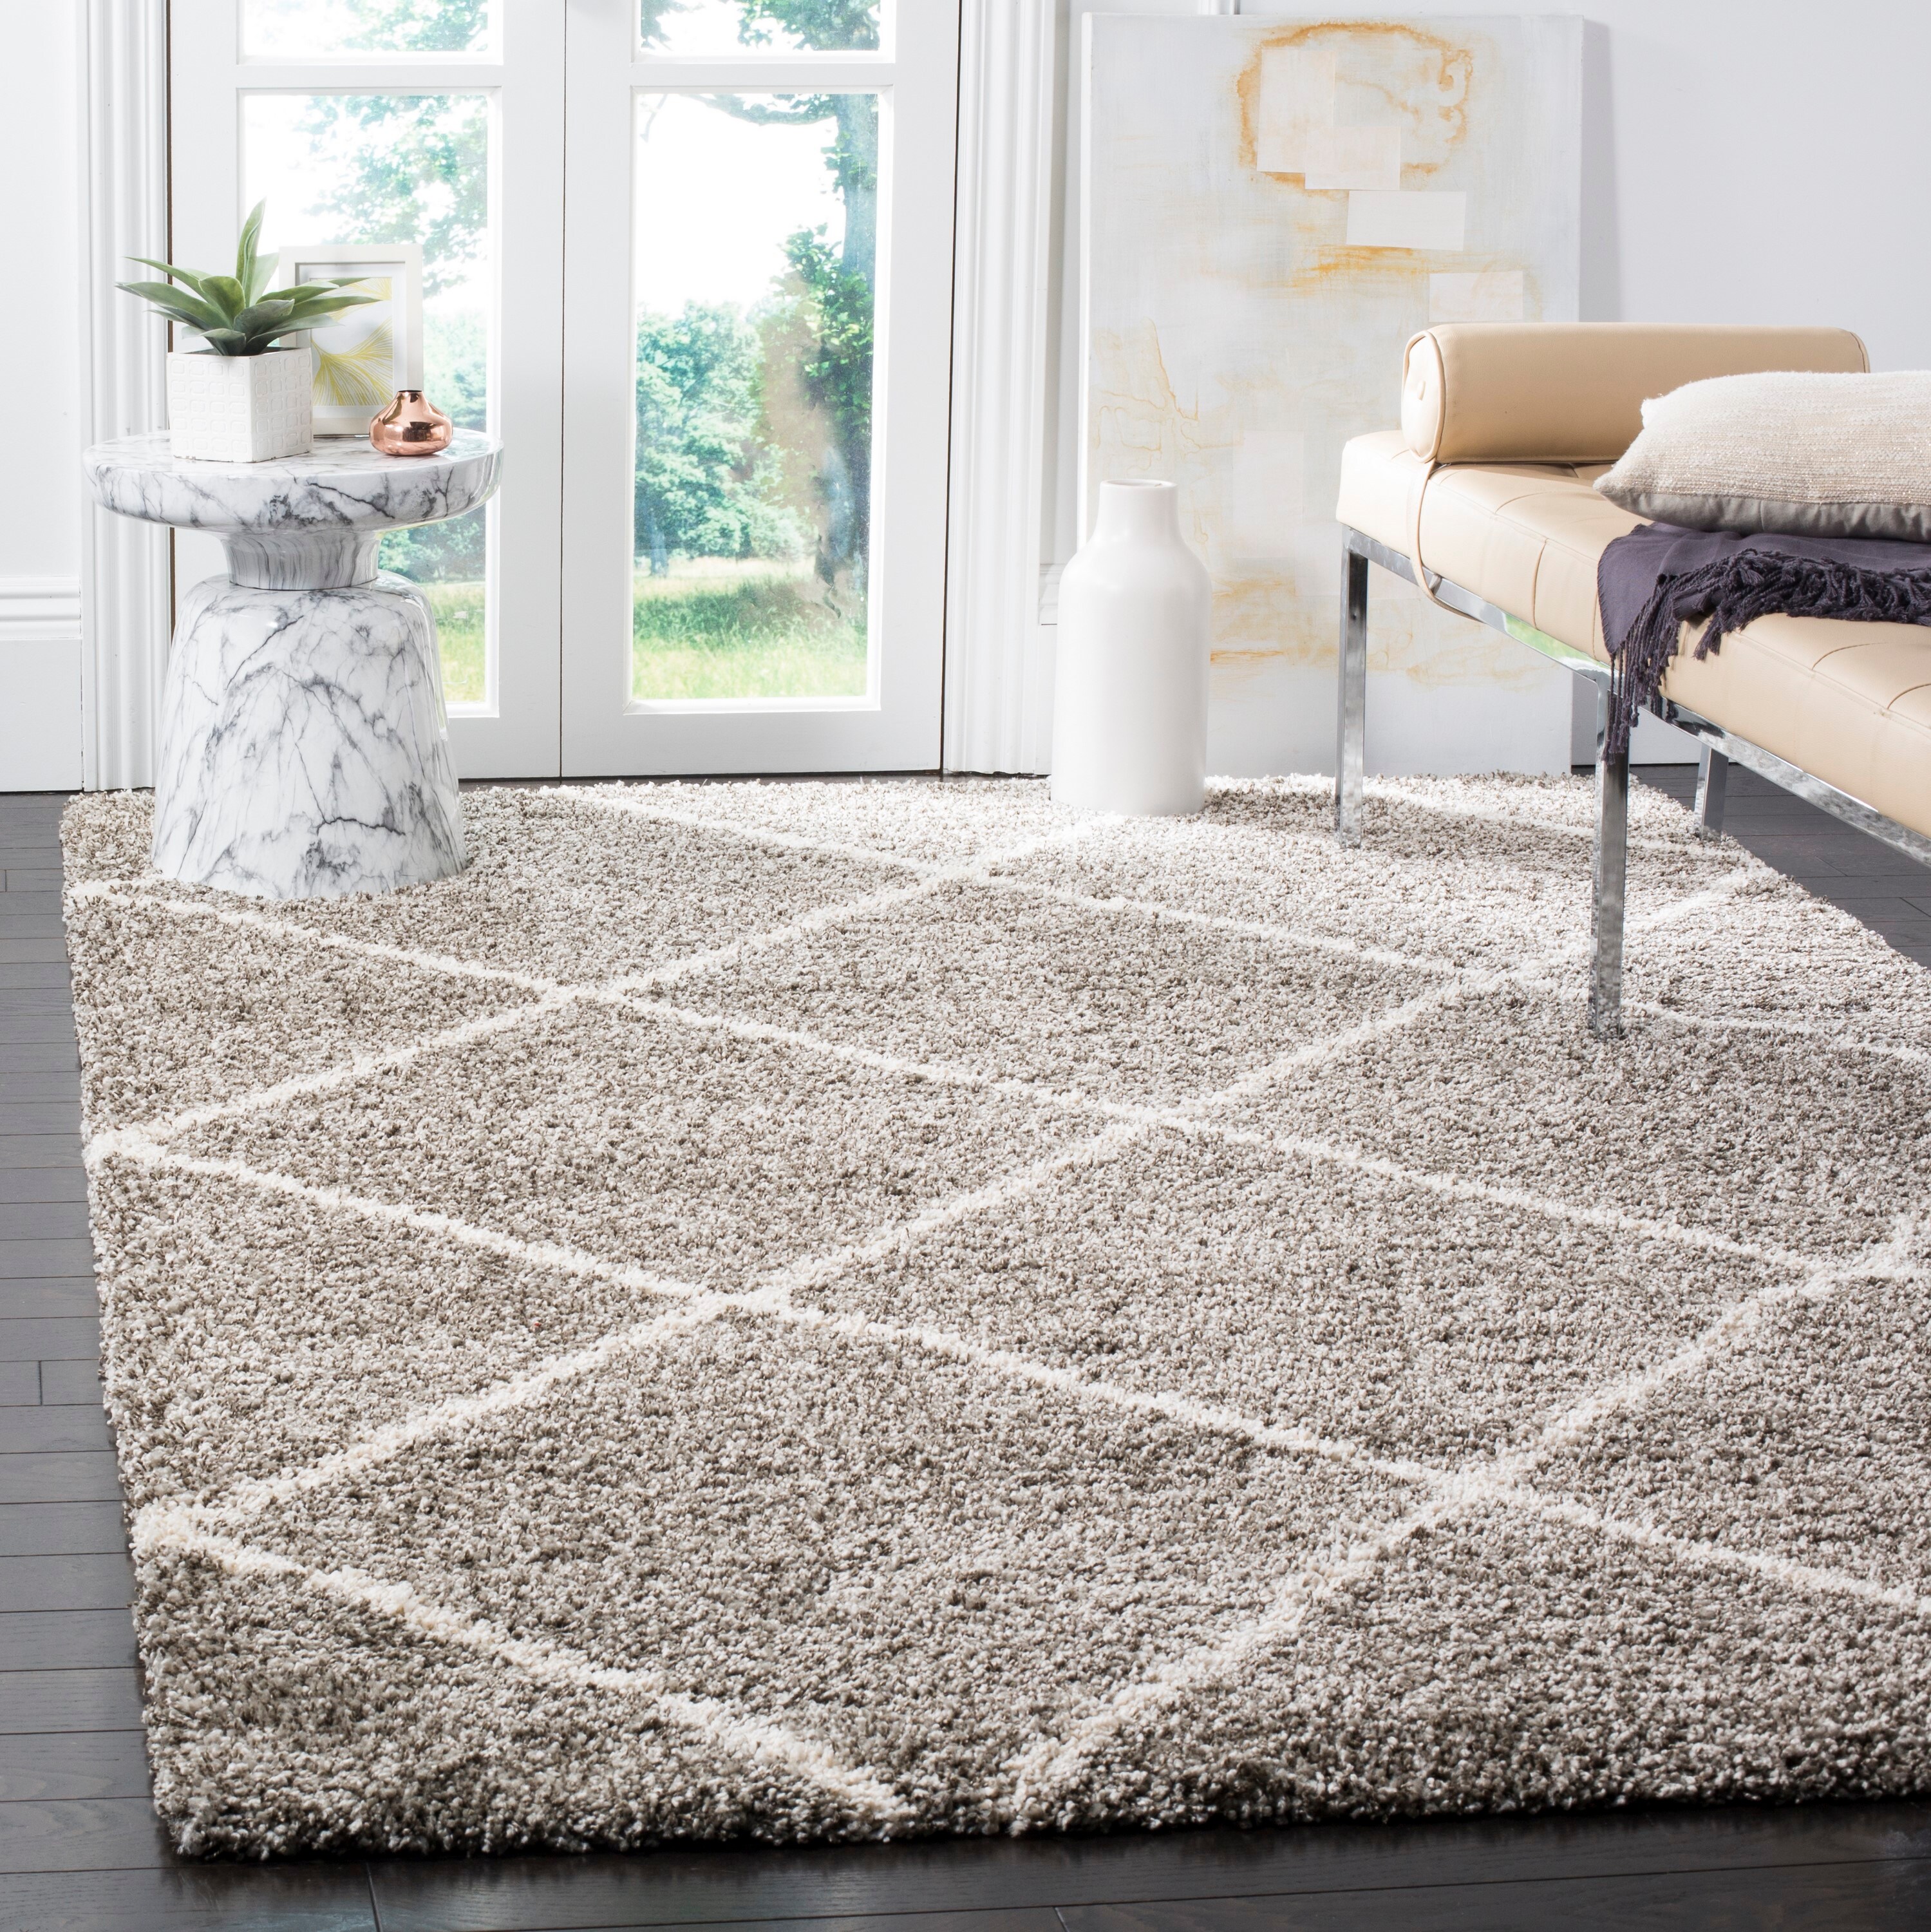 B.PRIME 2x3-Feet Non-Slip Rug Underlay Pad for Hard Floors. Different Size  Options Available